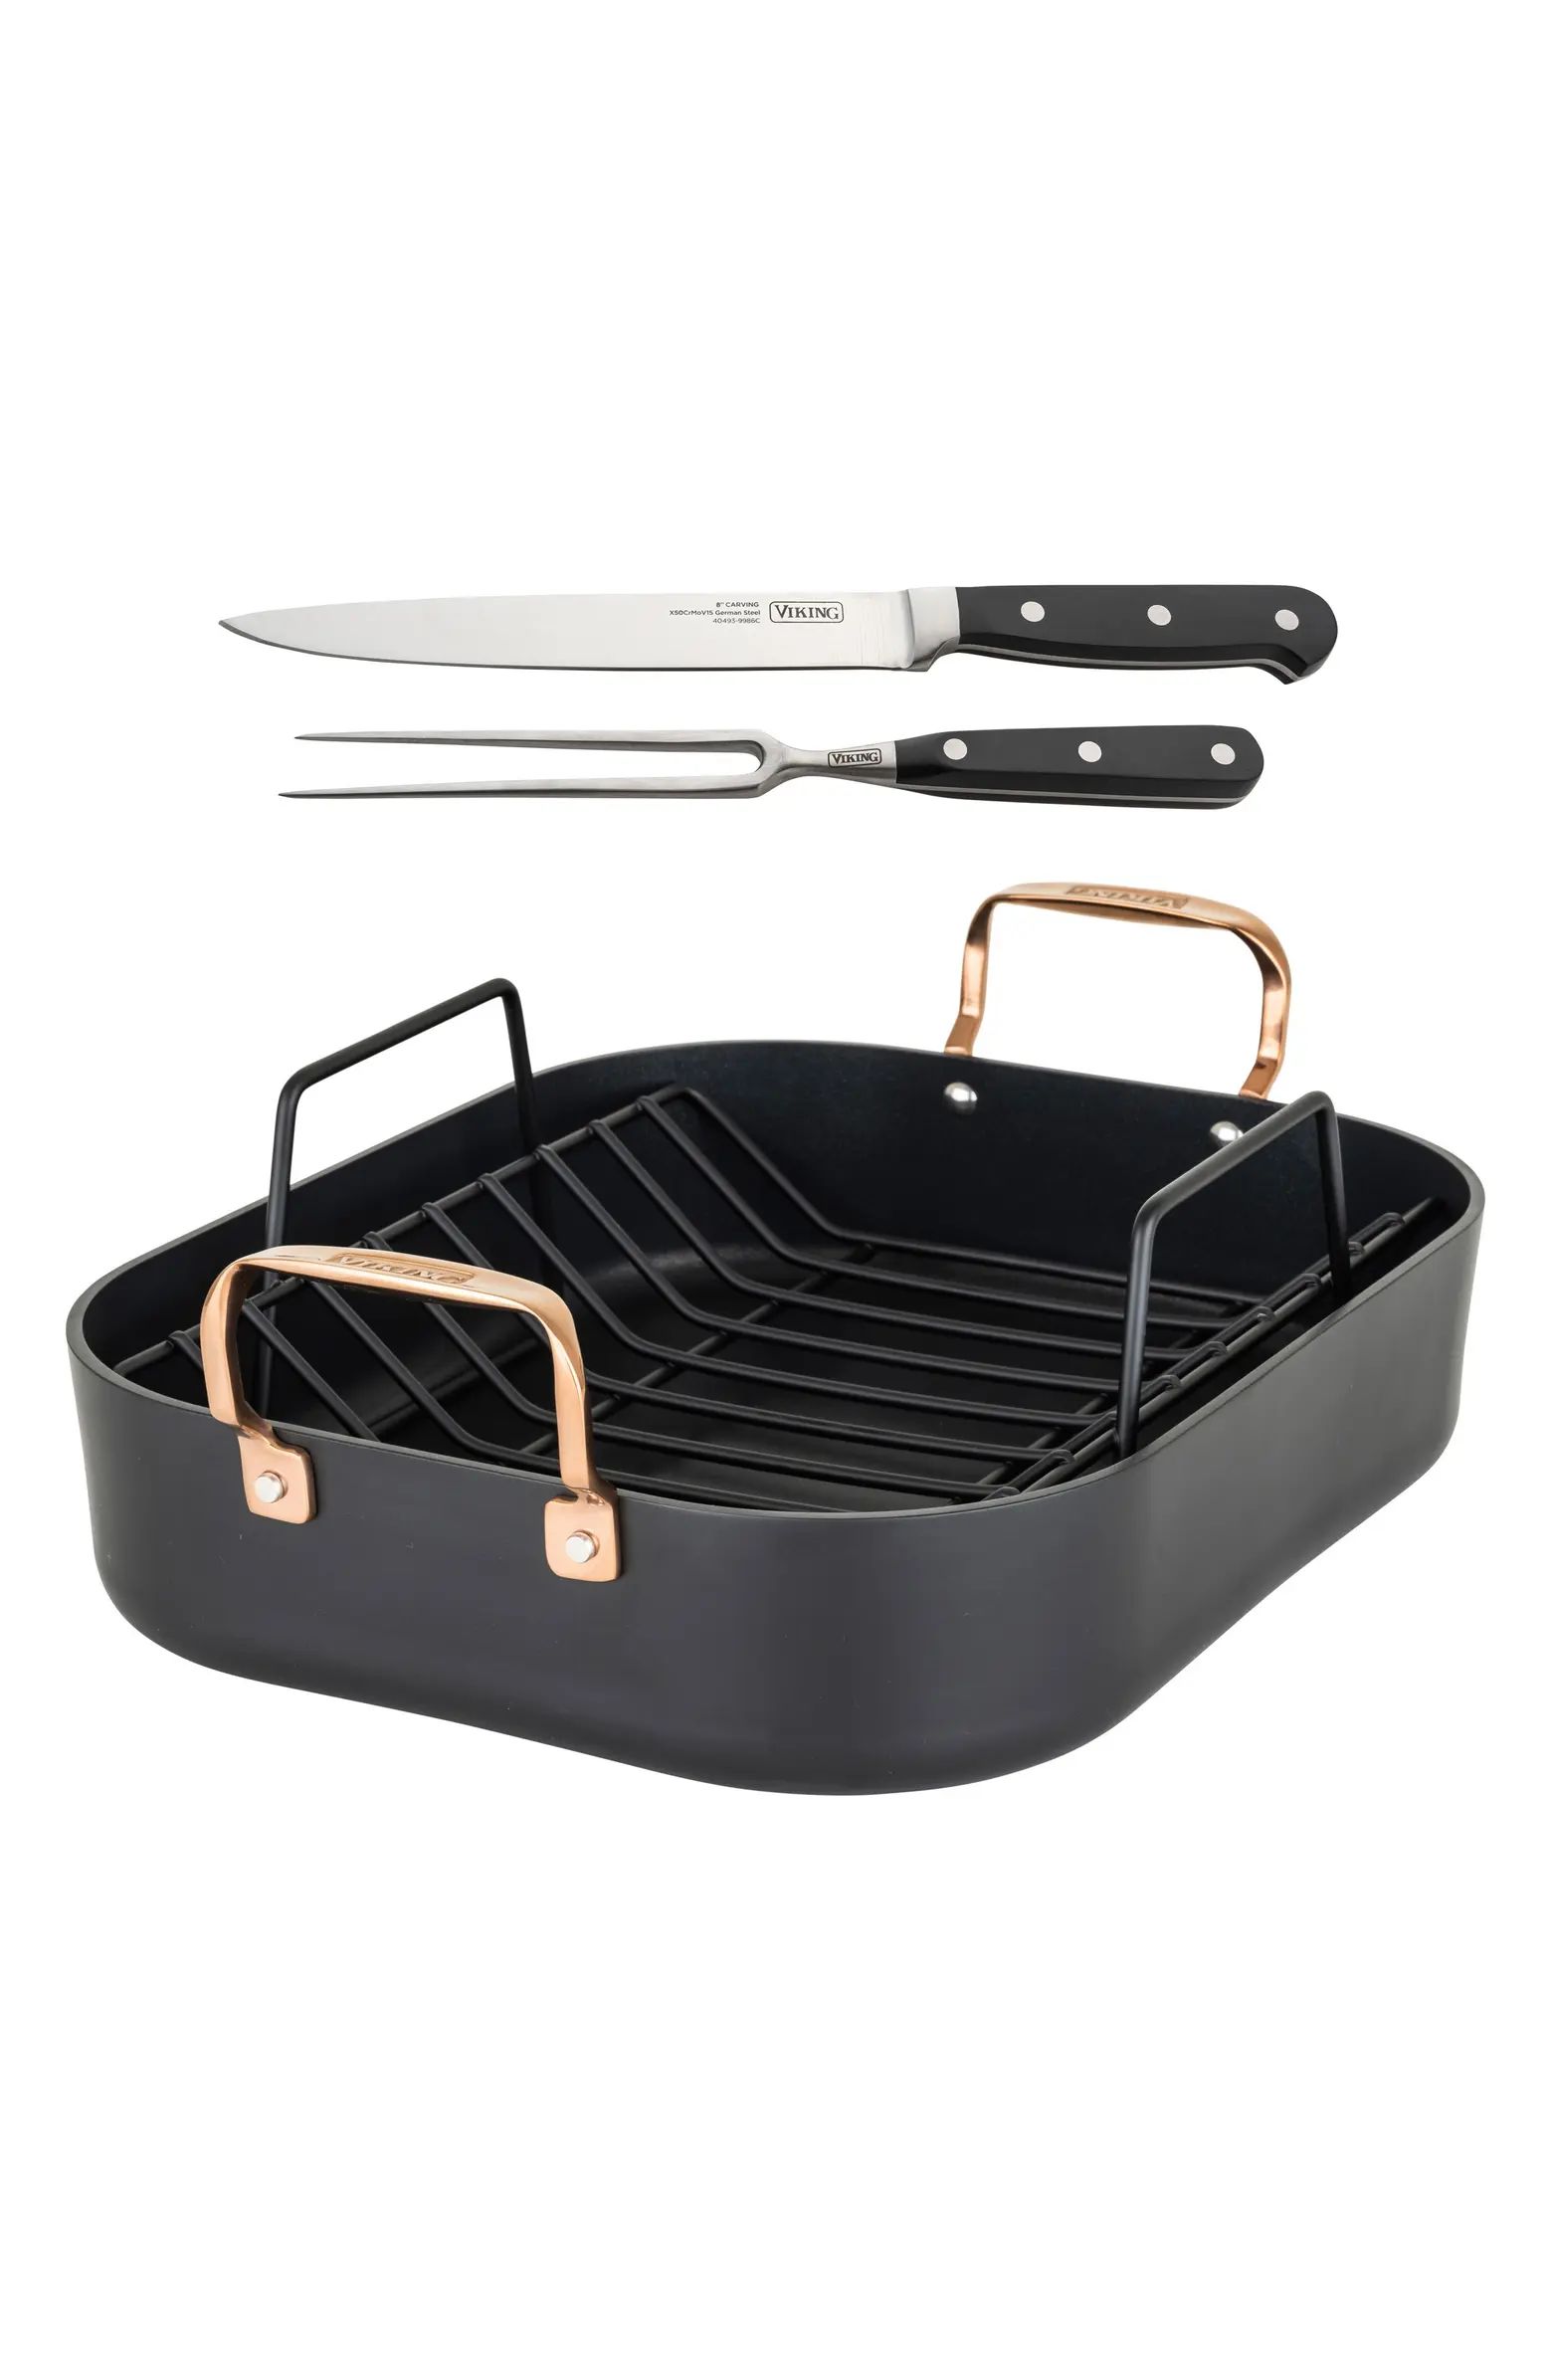 Viking Hard Anodized Nonstick Roasting Pan with Carving Set | Nordstrom | Nordstrom